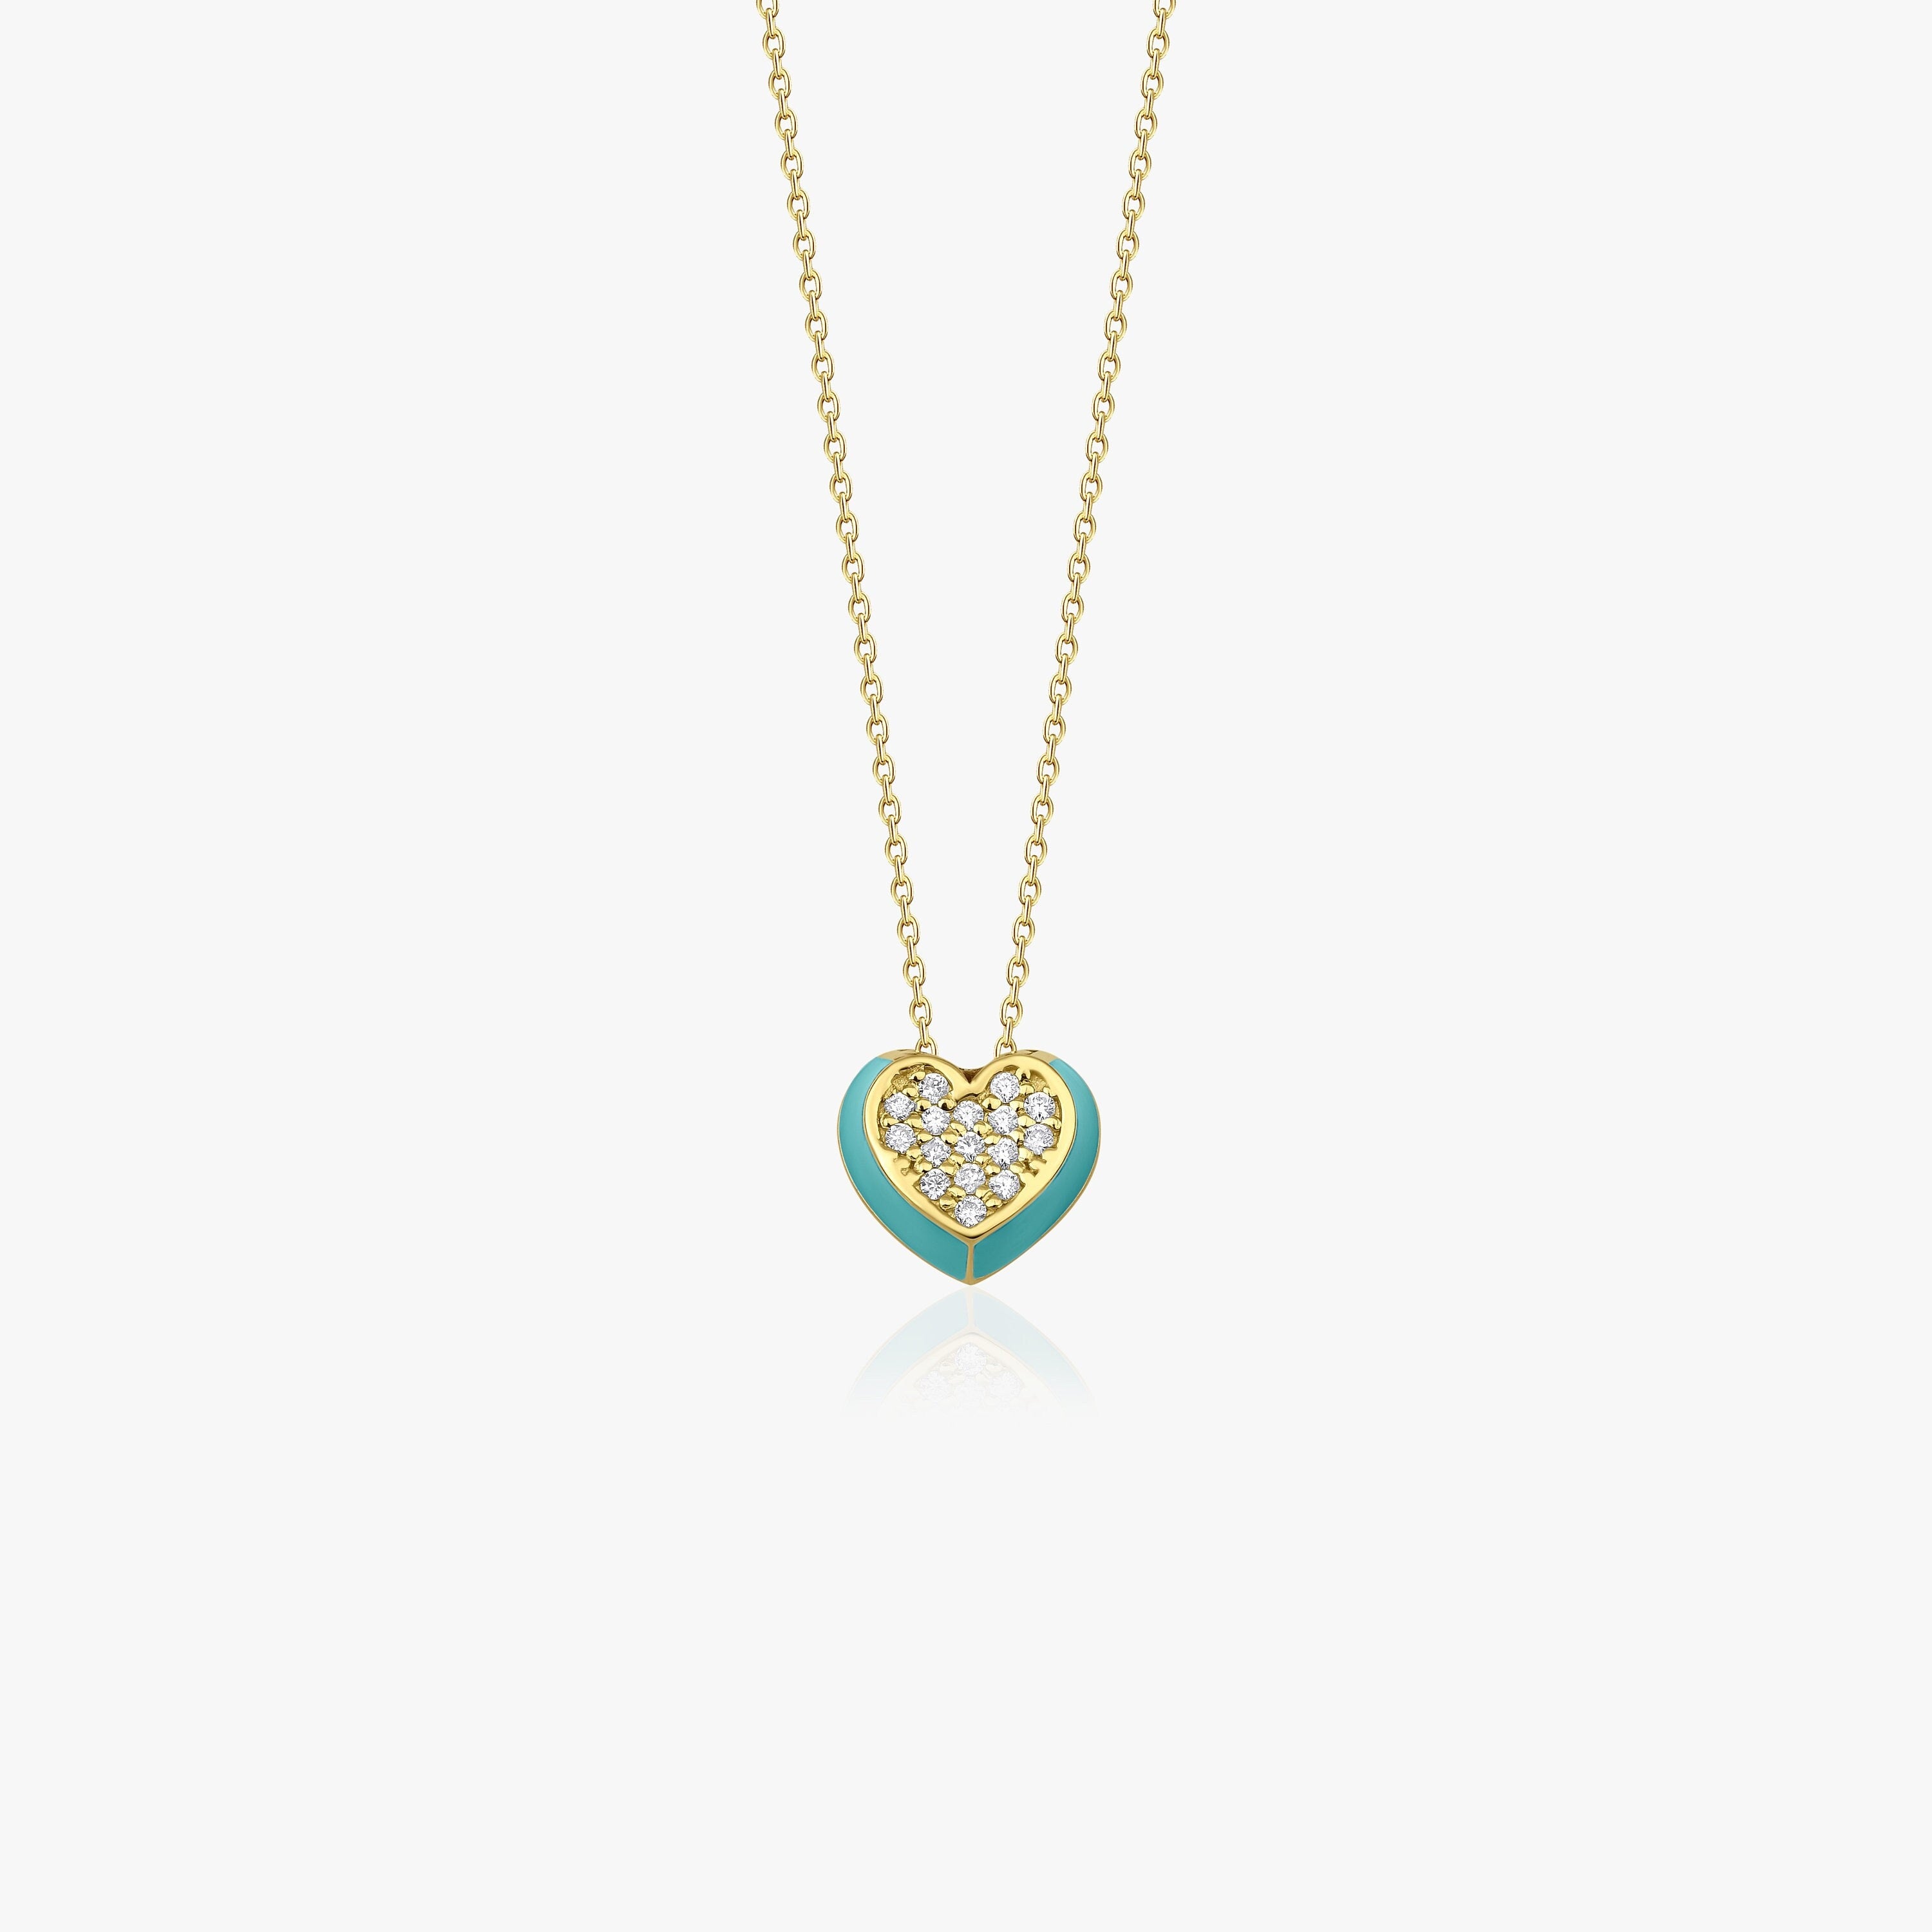 14K Gold Diamond Turquoise Heart Necklace